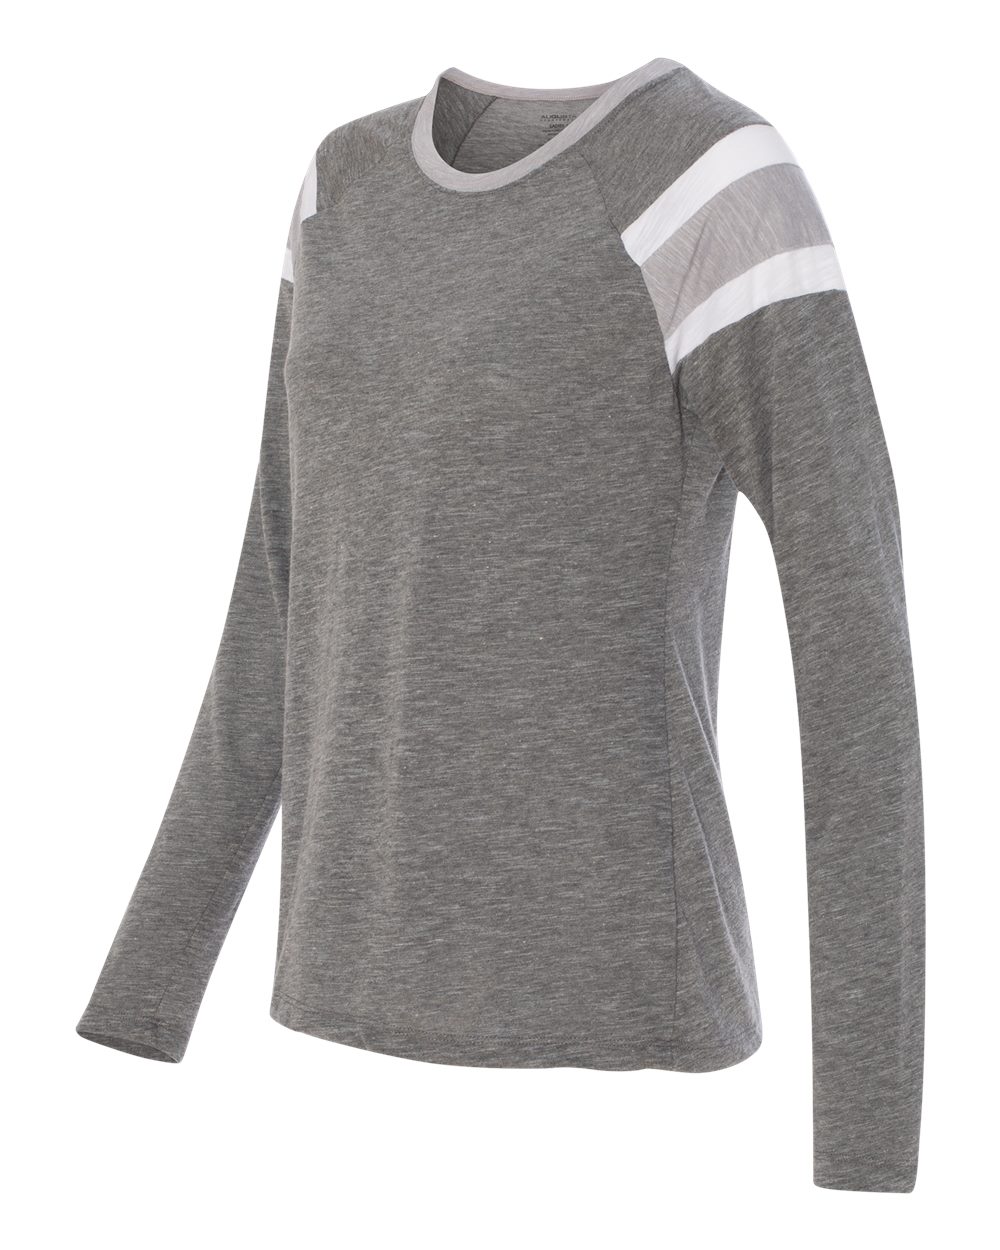 click to view Slate/ Athletic Heather/ White